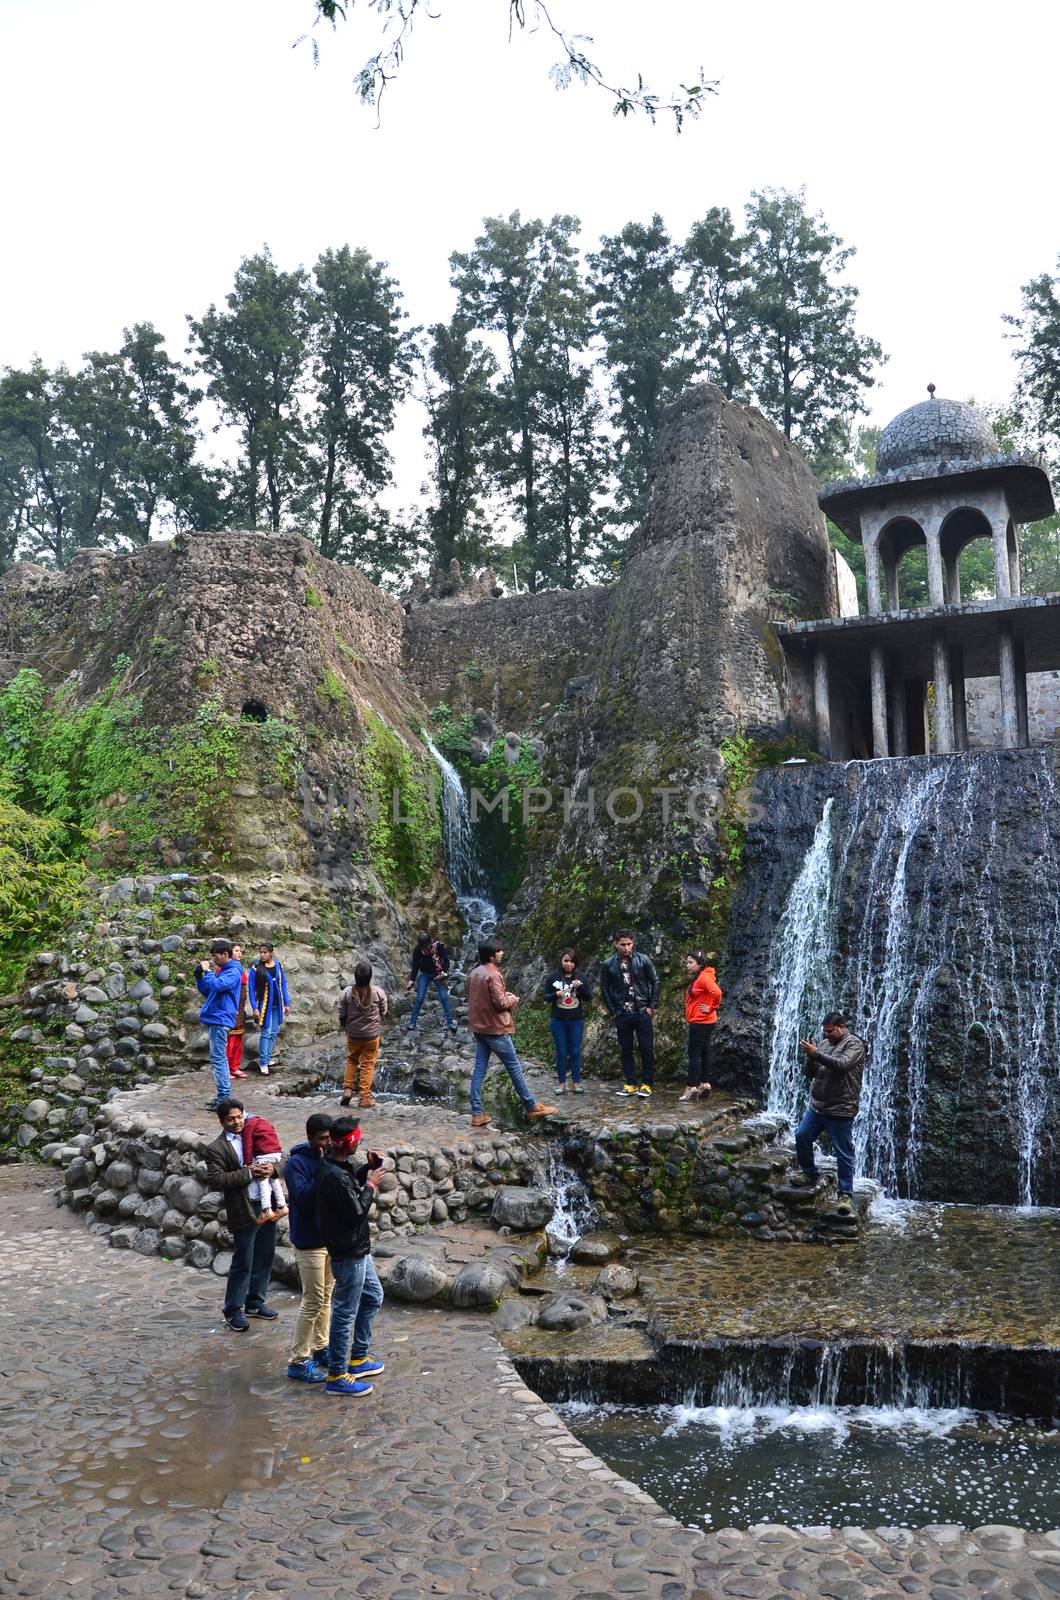 Chandigarh, India - January 4, 2015: People visit Rock statues at the rock garden on January 4, 2015 in Chandigarh, India. The rock garden was founded by artist Nek Chand in 1957 and is made completely of recycled waste.